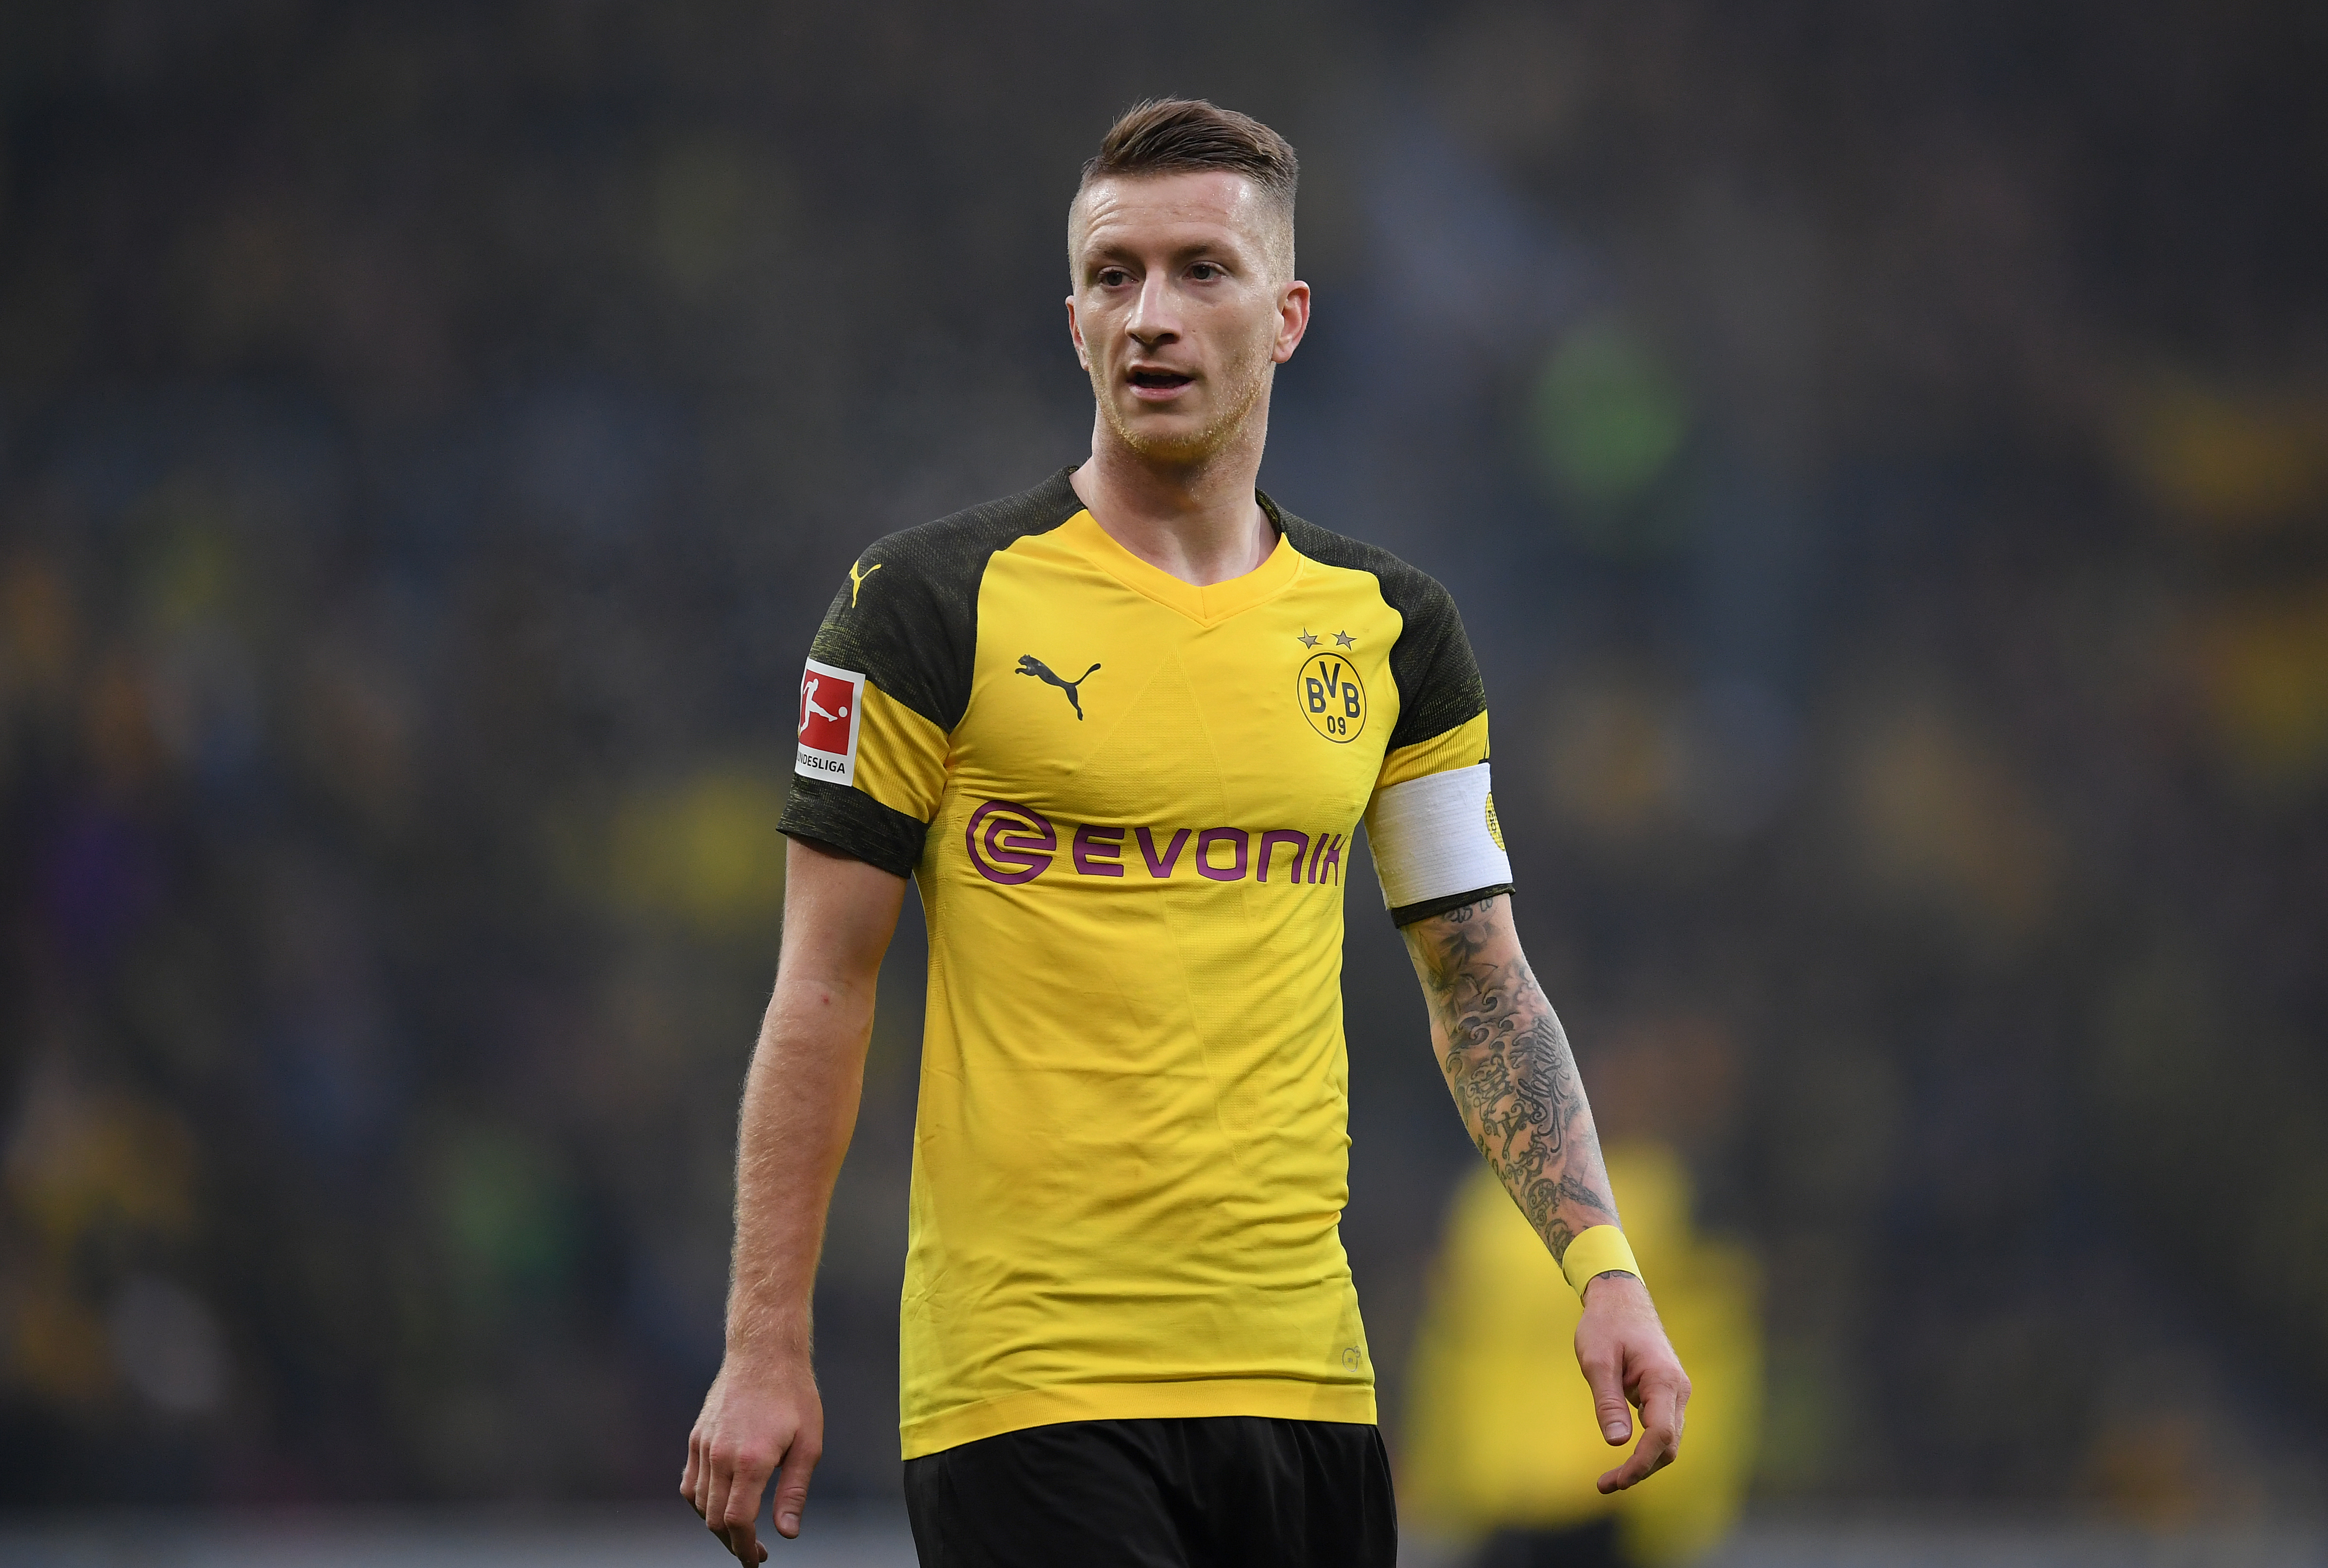 MAINZ, GERMANY - NOVEMBER 24: Marco Reus of Dortmund seen during the Bundesliga match between 1. FSV Mainz 05 and Borussia Dortmund at Opel Arena on November 24, 2018 in Mainz, Germany. (Photo by Matthias Hangst/Bongarts/Getty Images)